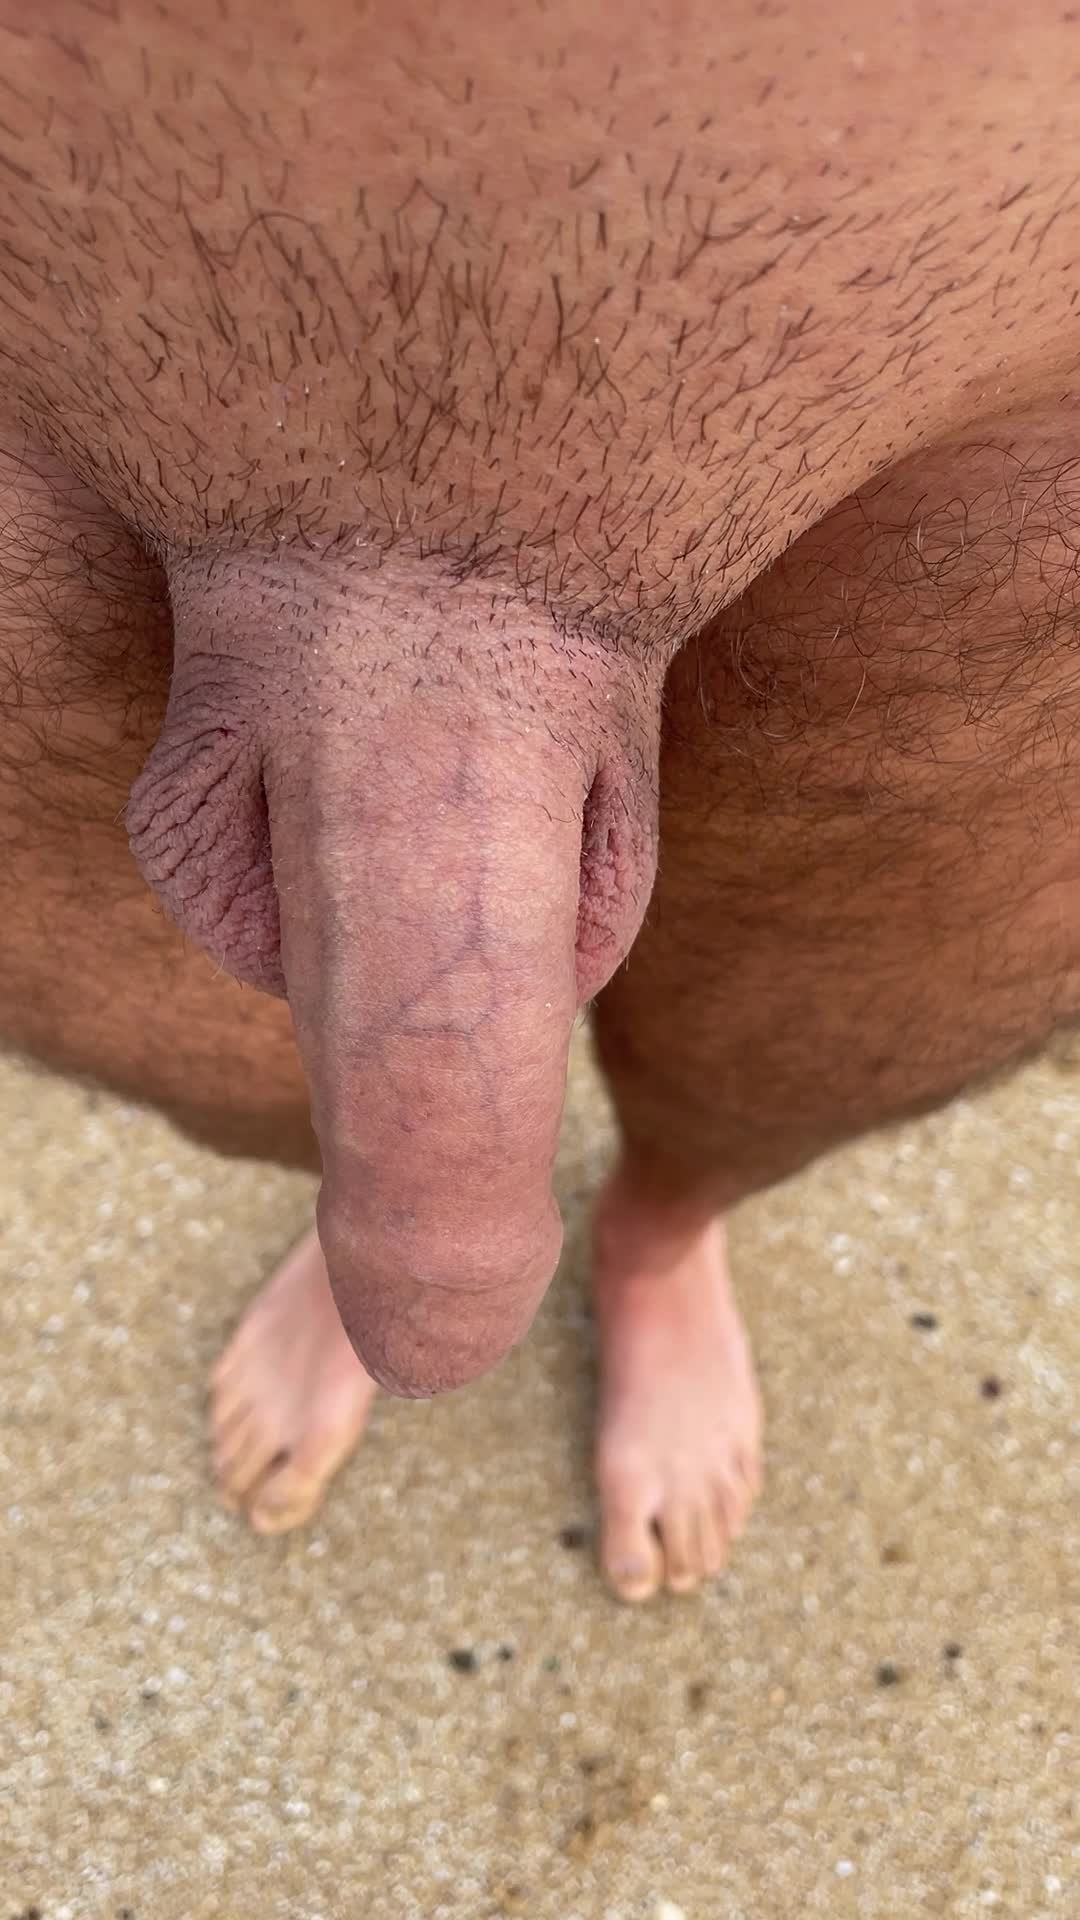 Video by OzNudeUncut with the username @OzNudeUncut, who is a verified user,  May 12, 2022 at 2:47 AM. The post is about the topic Gay nude beach and the text says 'Pissing on my feet
#piss #uncut #nudebeach'